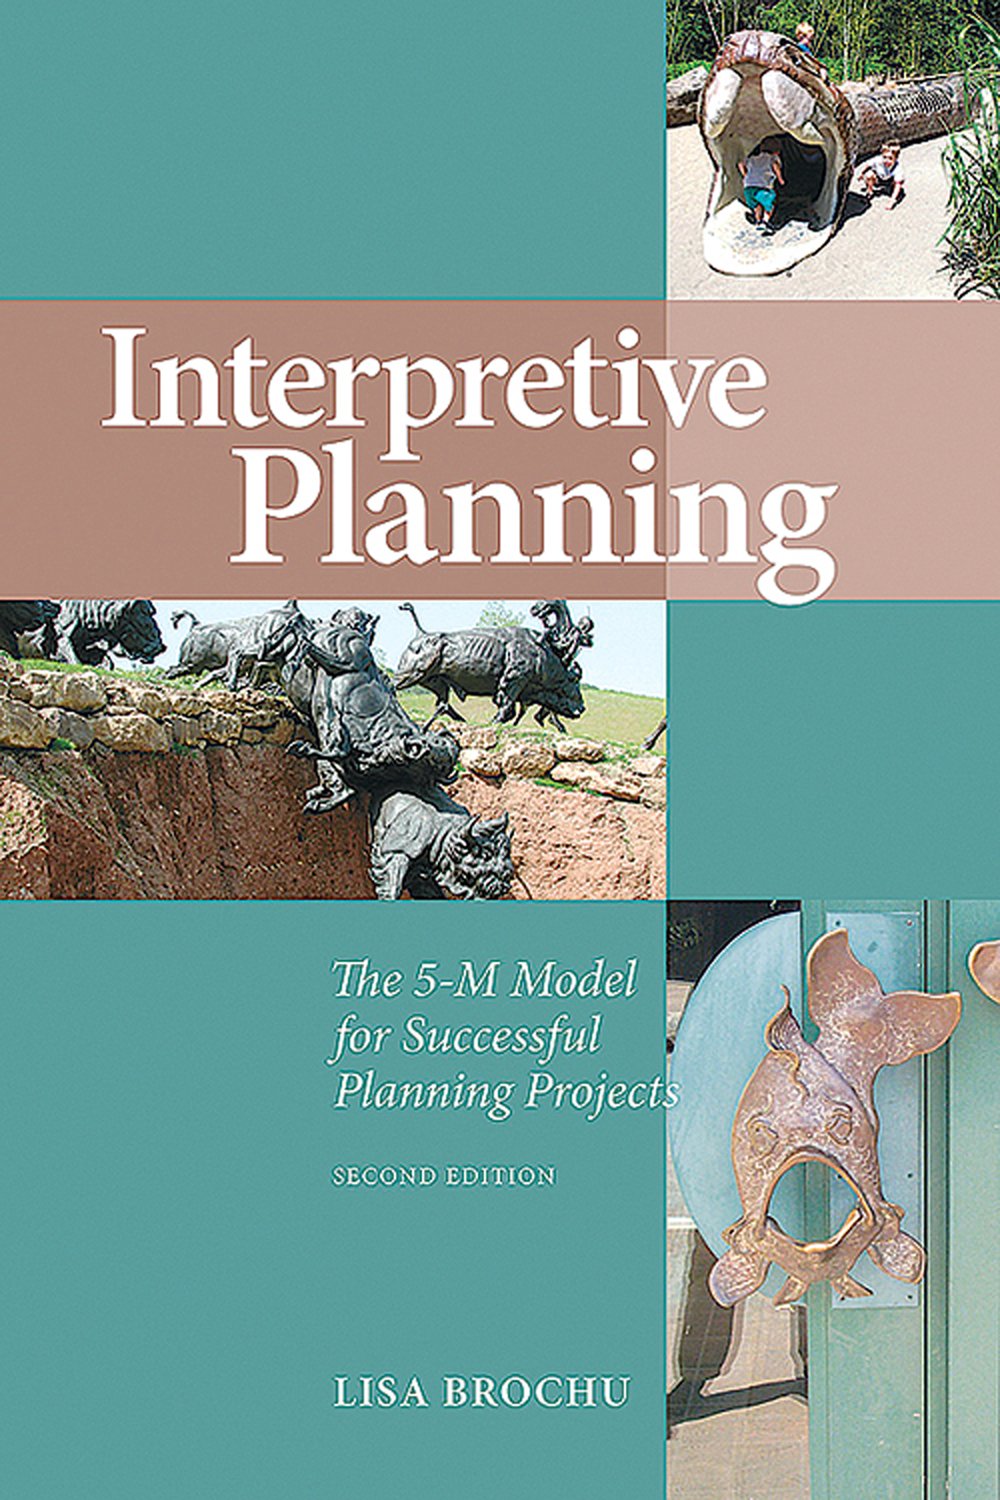 Interpretive Planning: The 5-M Model for Successful Planning Projects (2nd Edition)